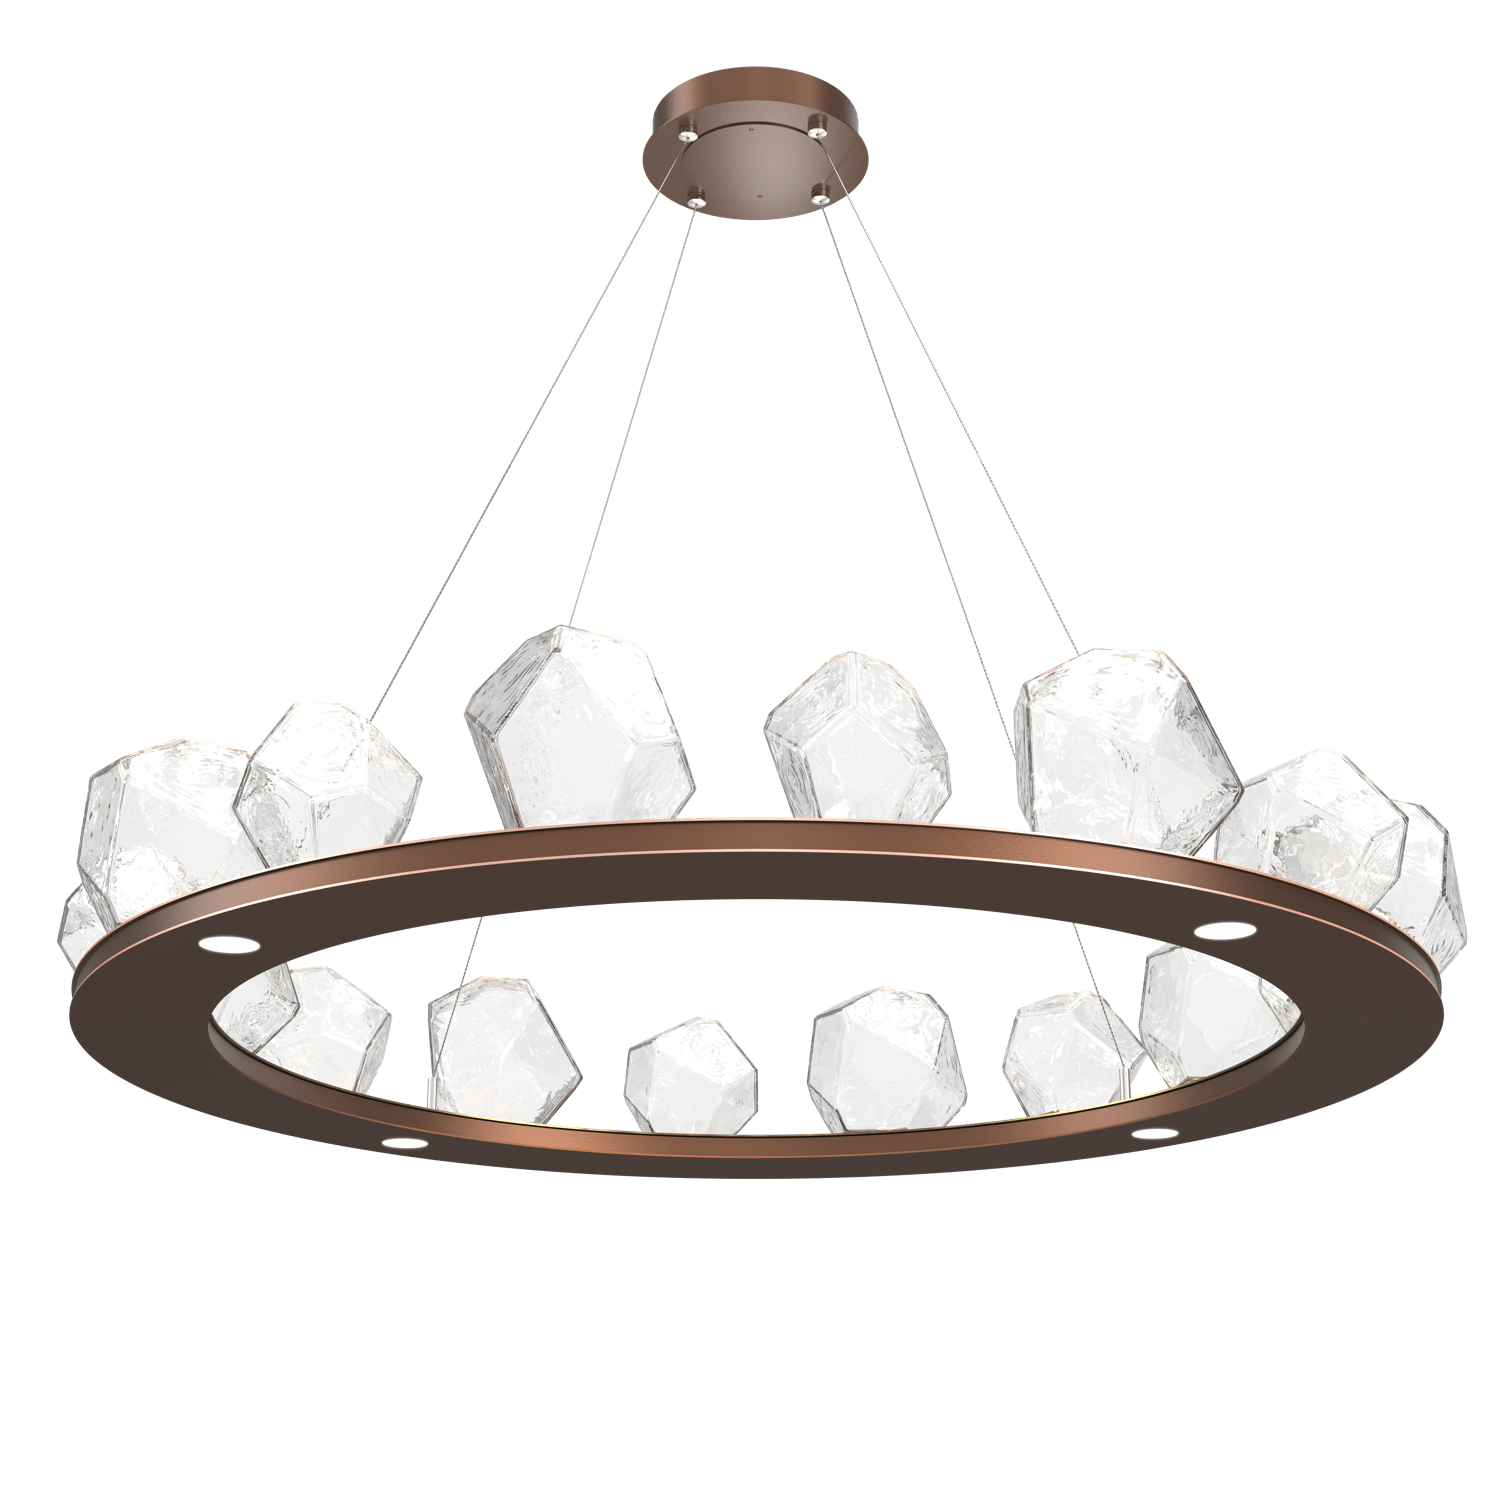 CHB0039-0D-BB-C-Hammerton-Studio-Gem-48-inch-ring-chandelier-with-burnished-bronze-finish-and-clear-blown-glass-shades-and-LED-lamping